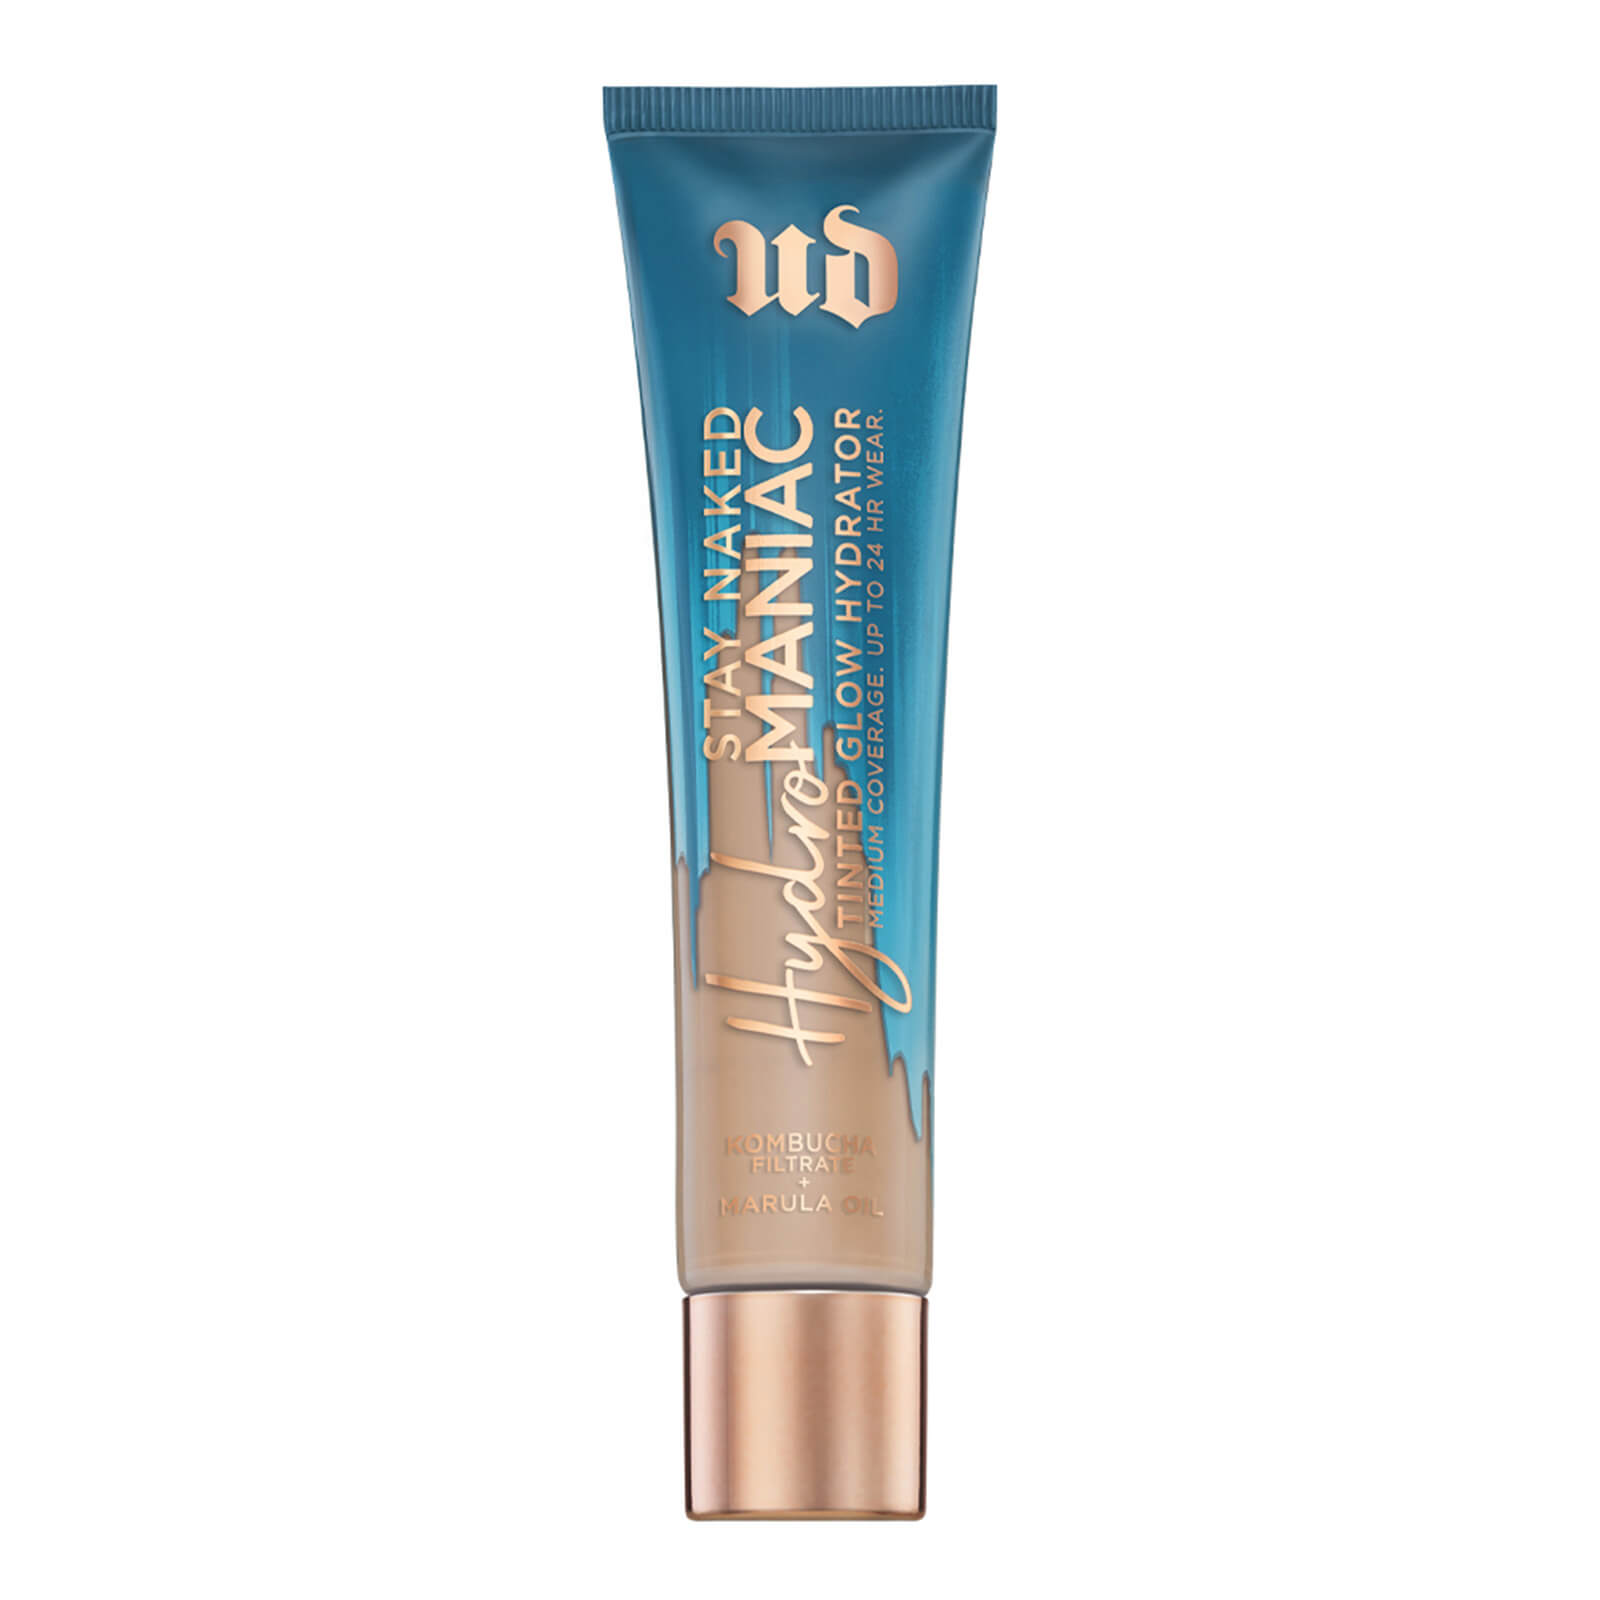 Image of Urban Decay Stay Naked Hydromaniac Tinted Glow Hydrator 35ml (Various Shades) - 40